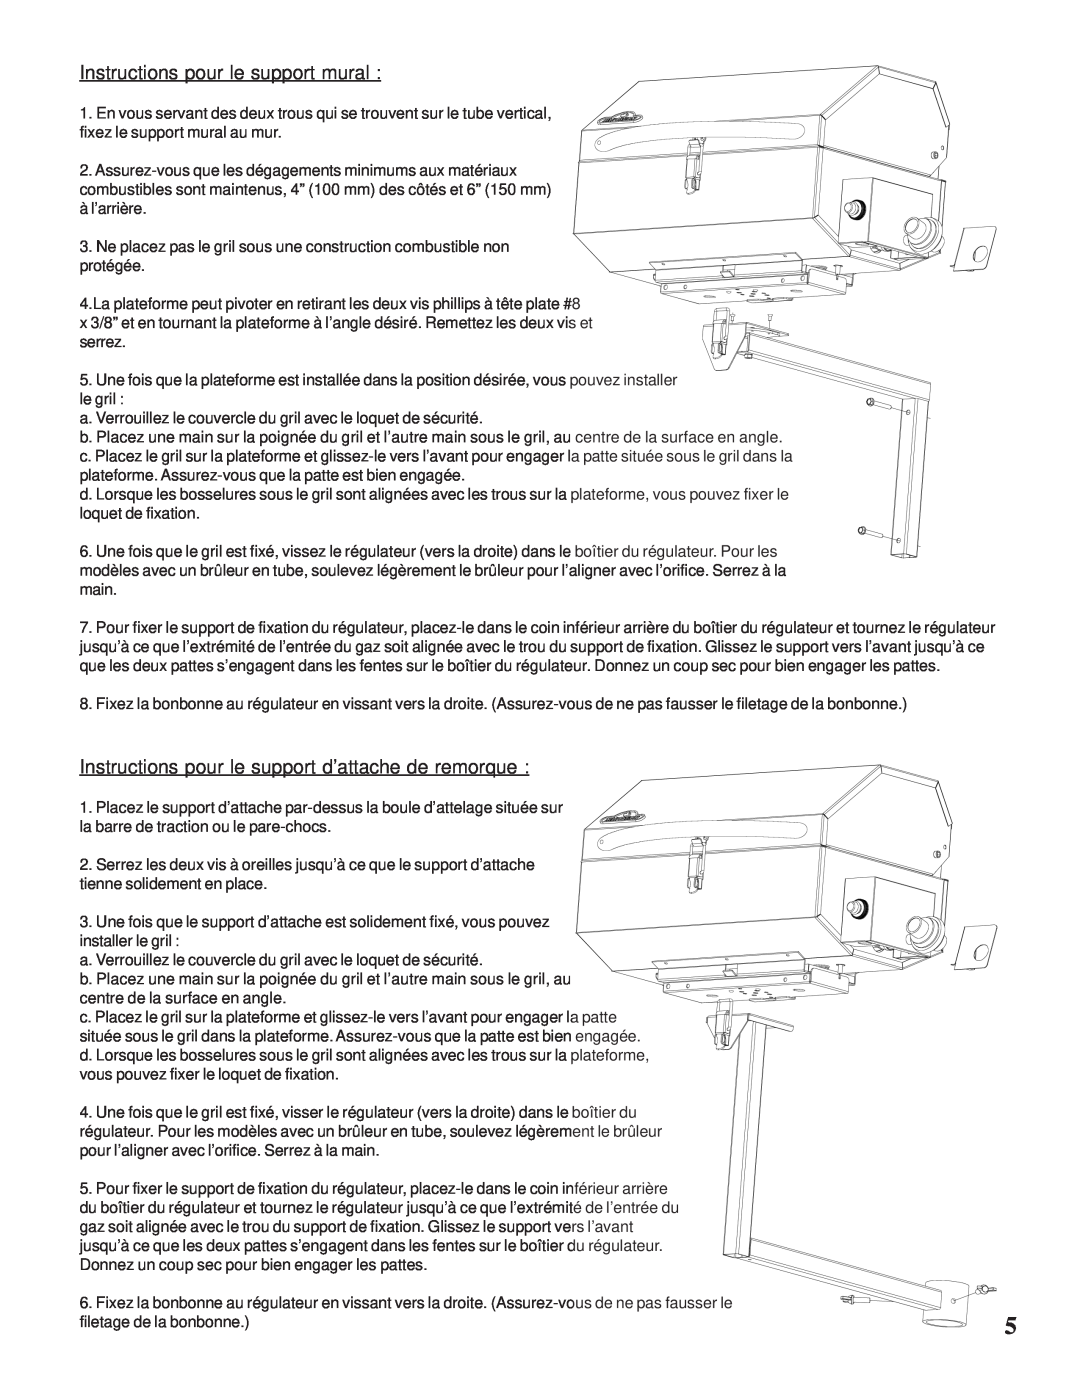 Napoleon Grills N415-0117 manual Instructions pour le support mural 